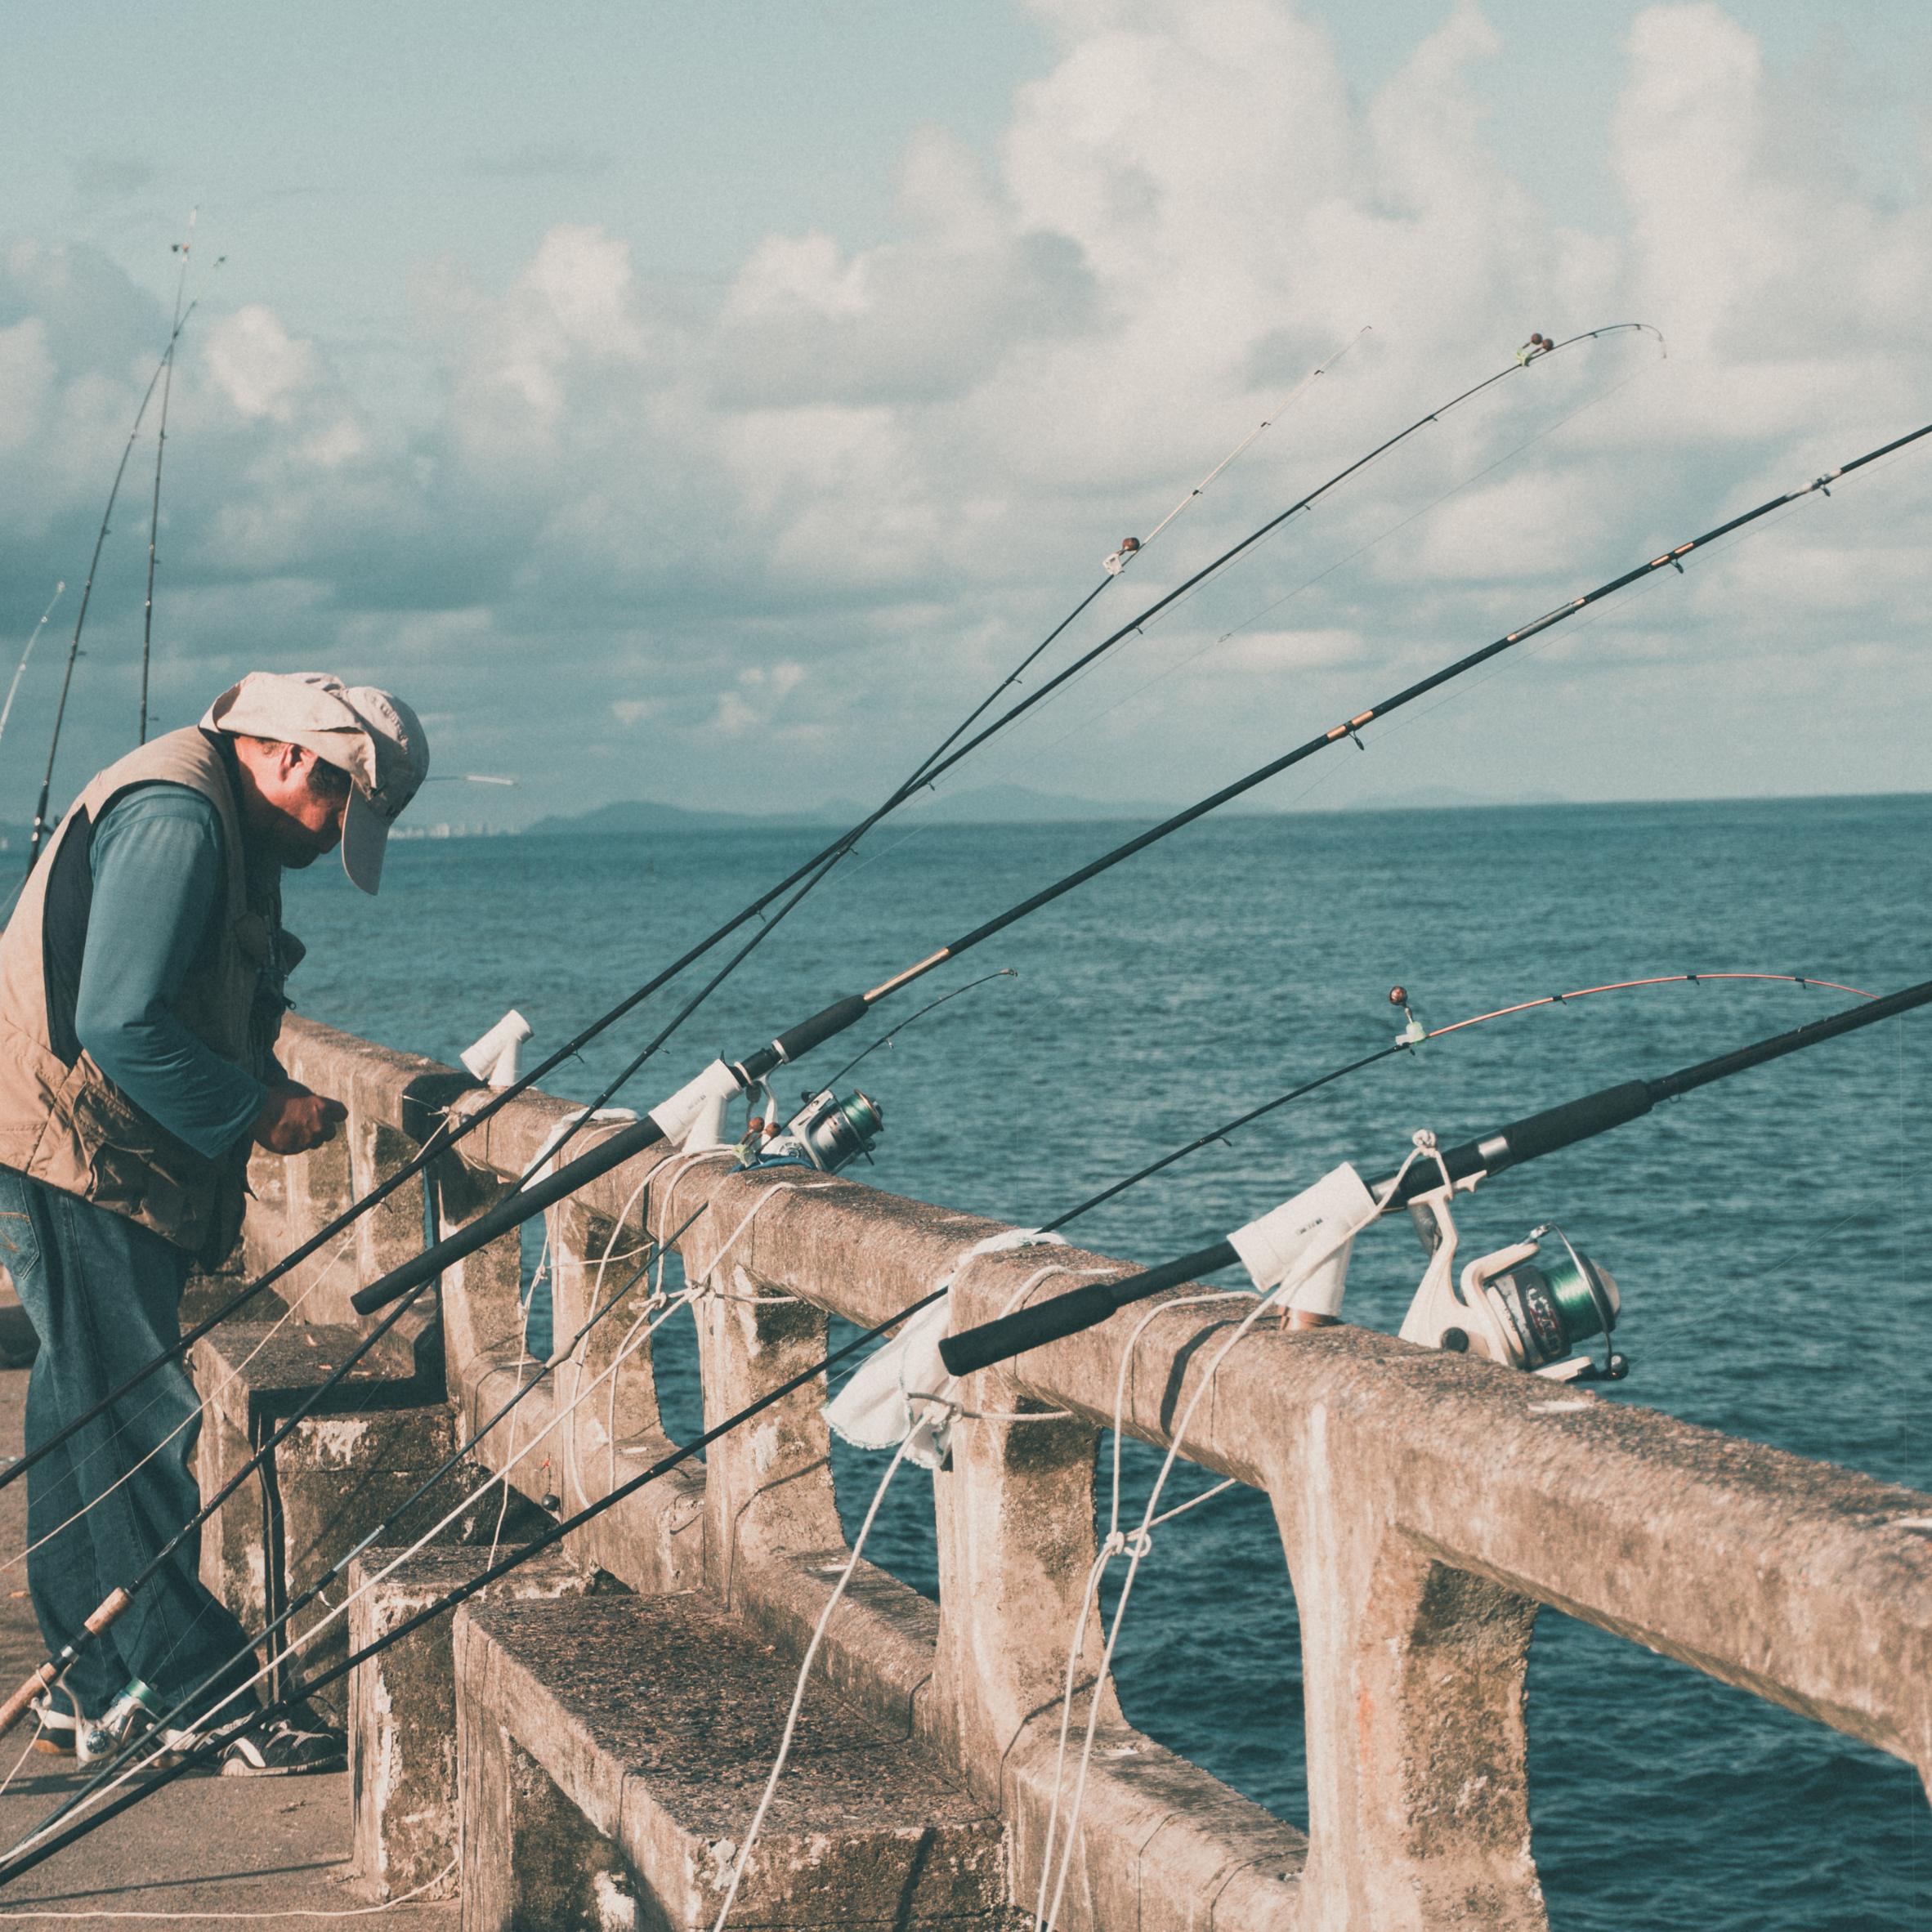 Different Types of Fishing Rods and Their Uses